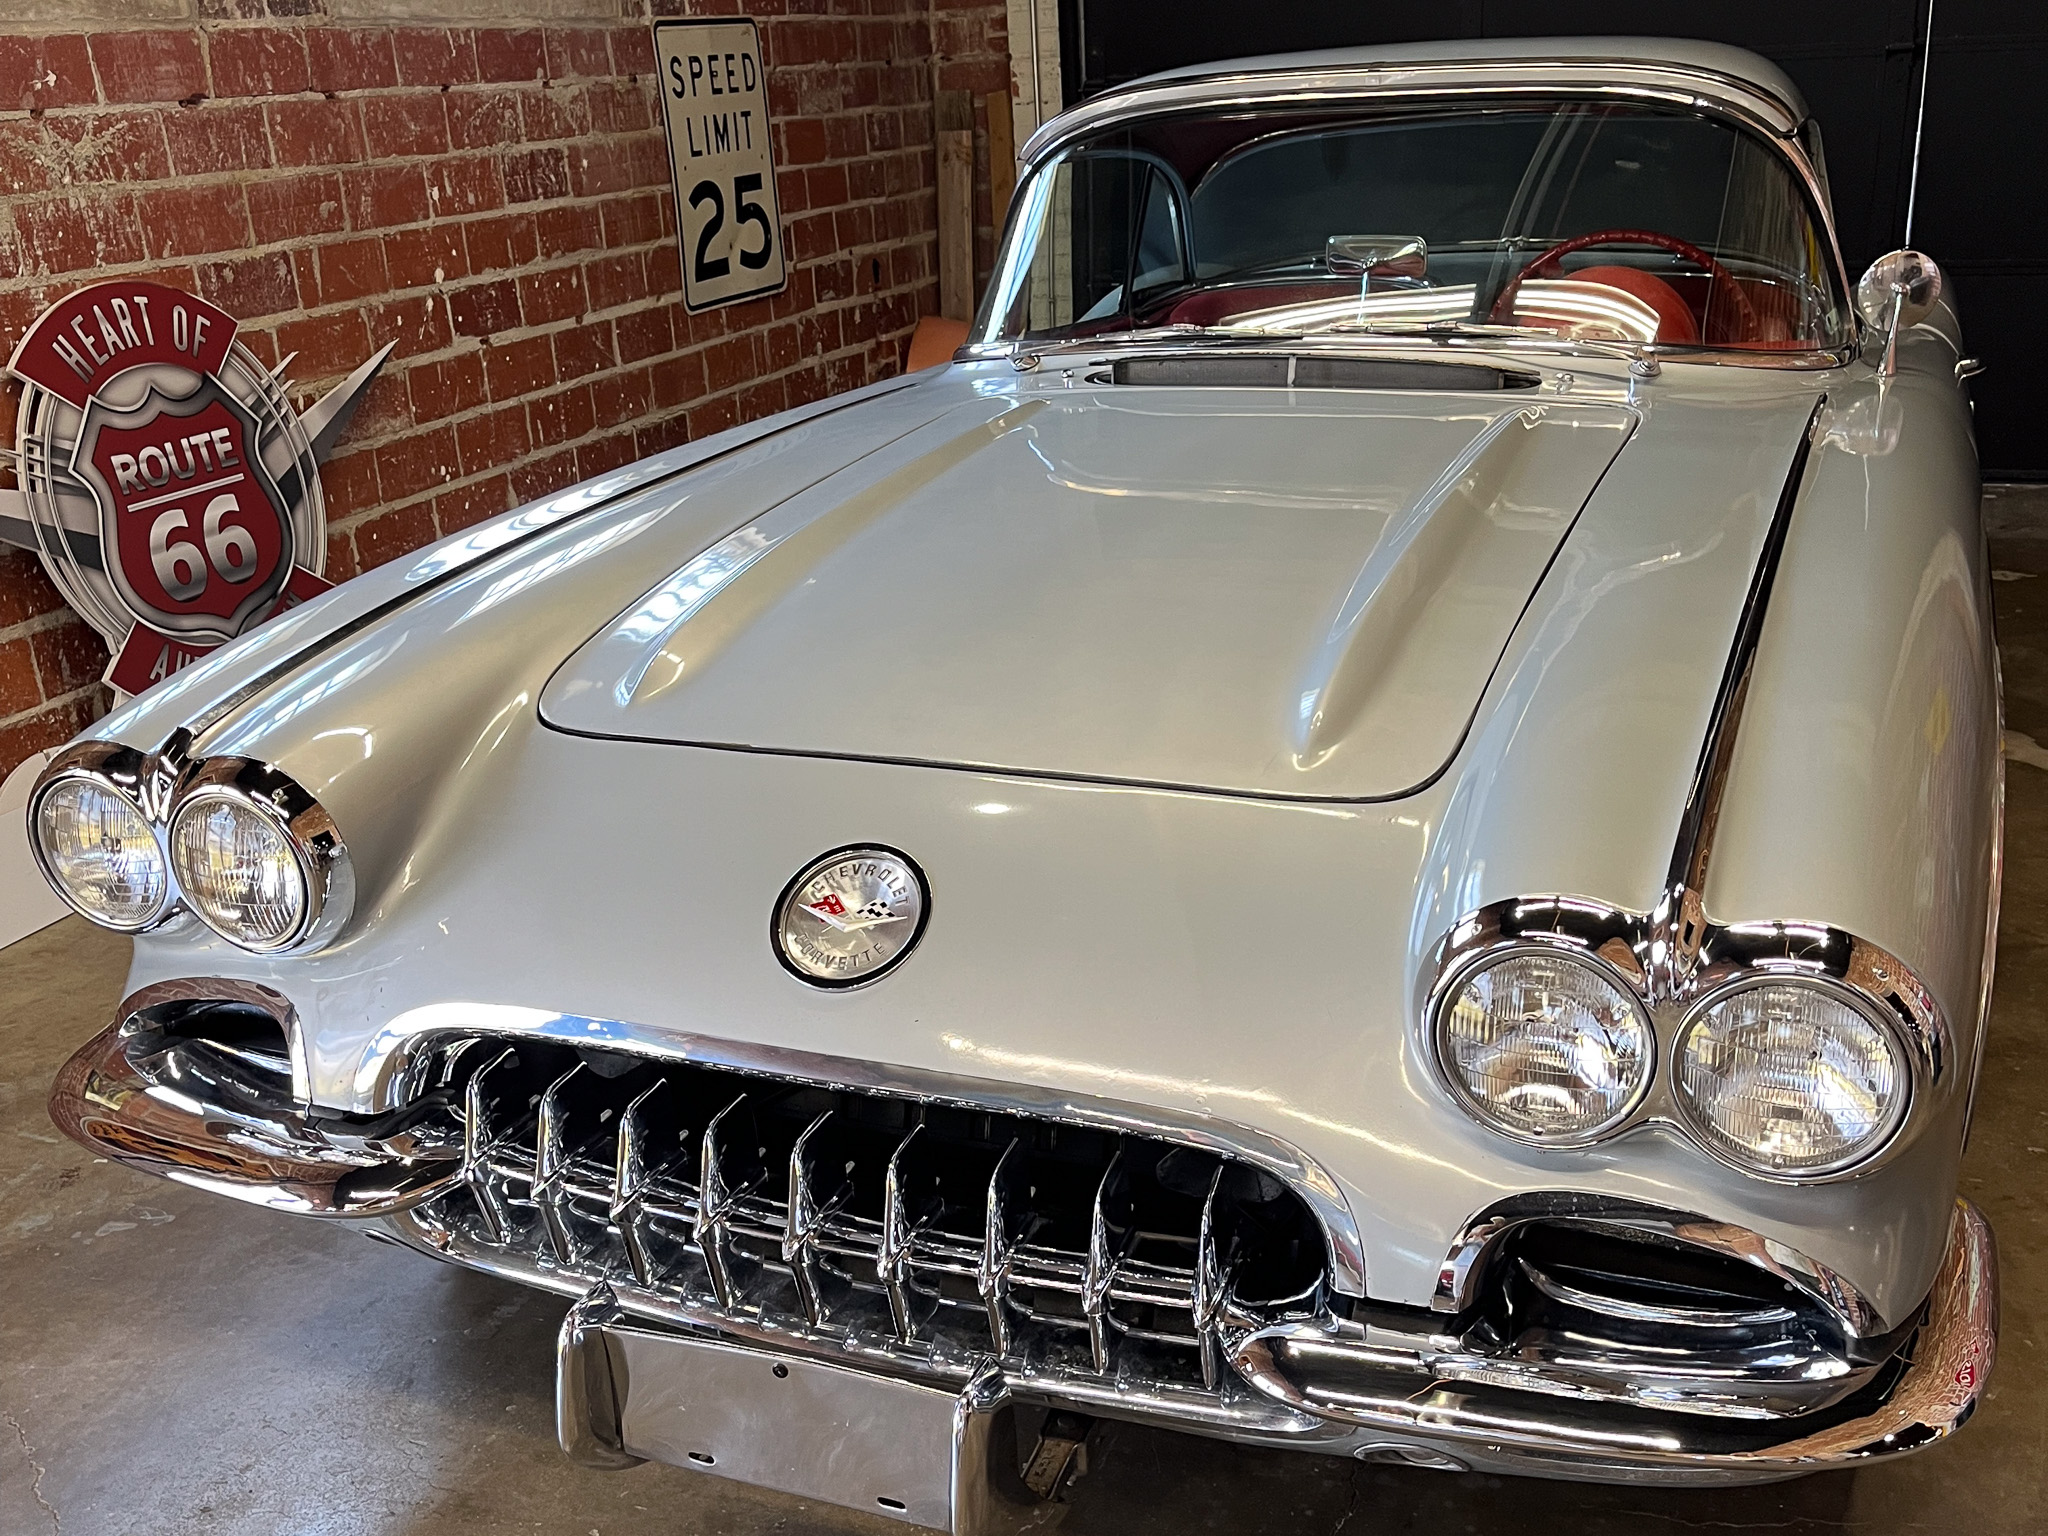 1960 Chevrolet Corvette Survivor - Previously on display at the Heart of Route 66 Auto Museum om Sapulpa, OK